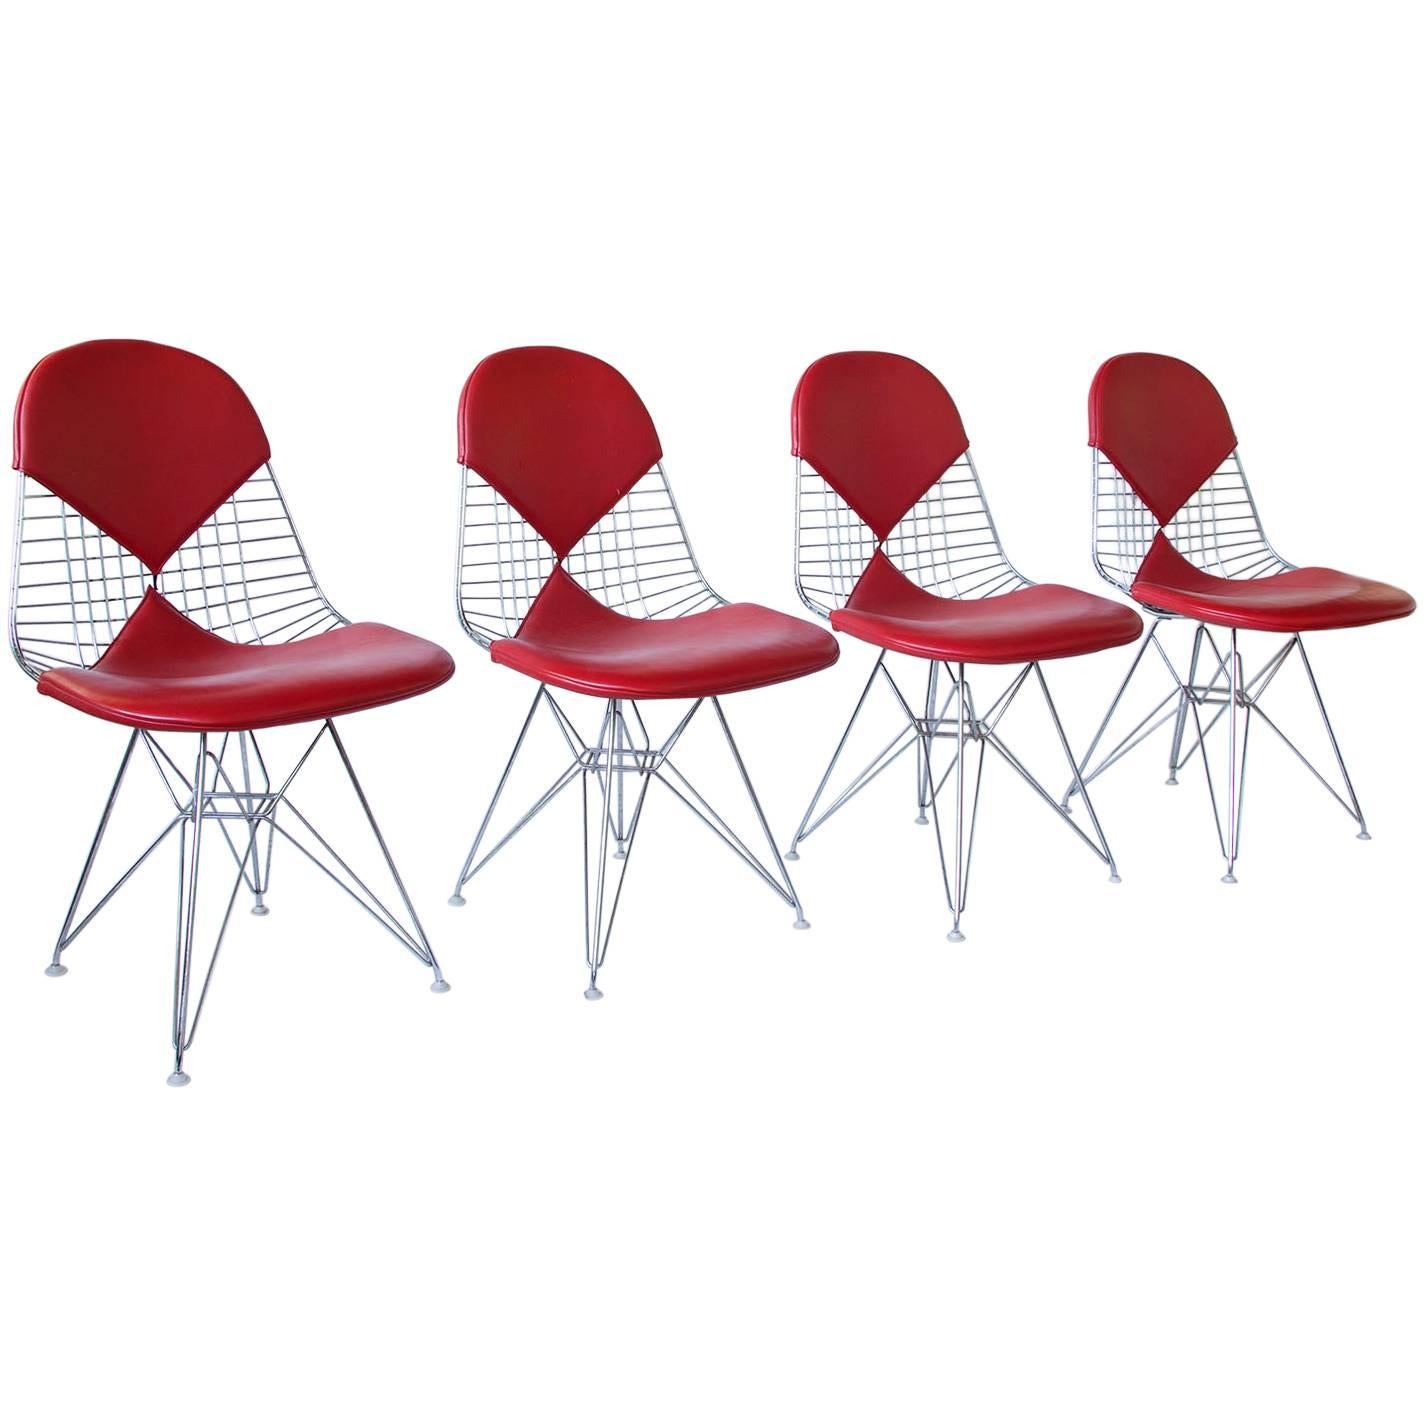 1950, Charles and Ray Eames, Set of Four DKR Chairs Red Leather Bikinis For Sale